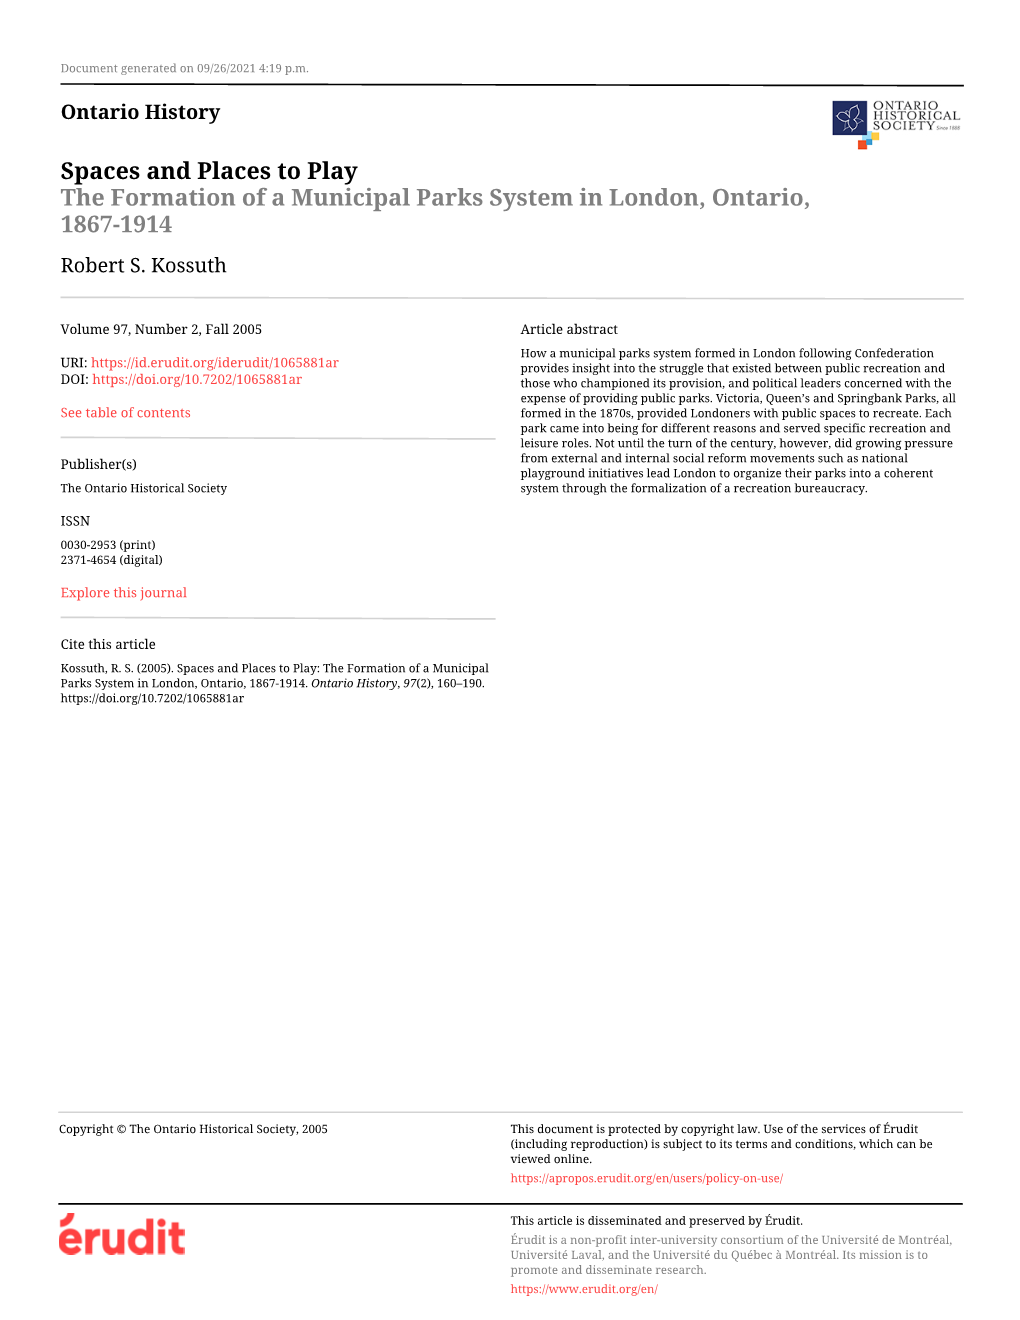 Spaces and Places to Play: the Formation of a Municipal Parks System in London, Ontario, 1867-1914